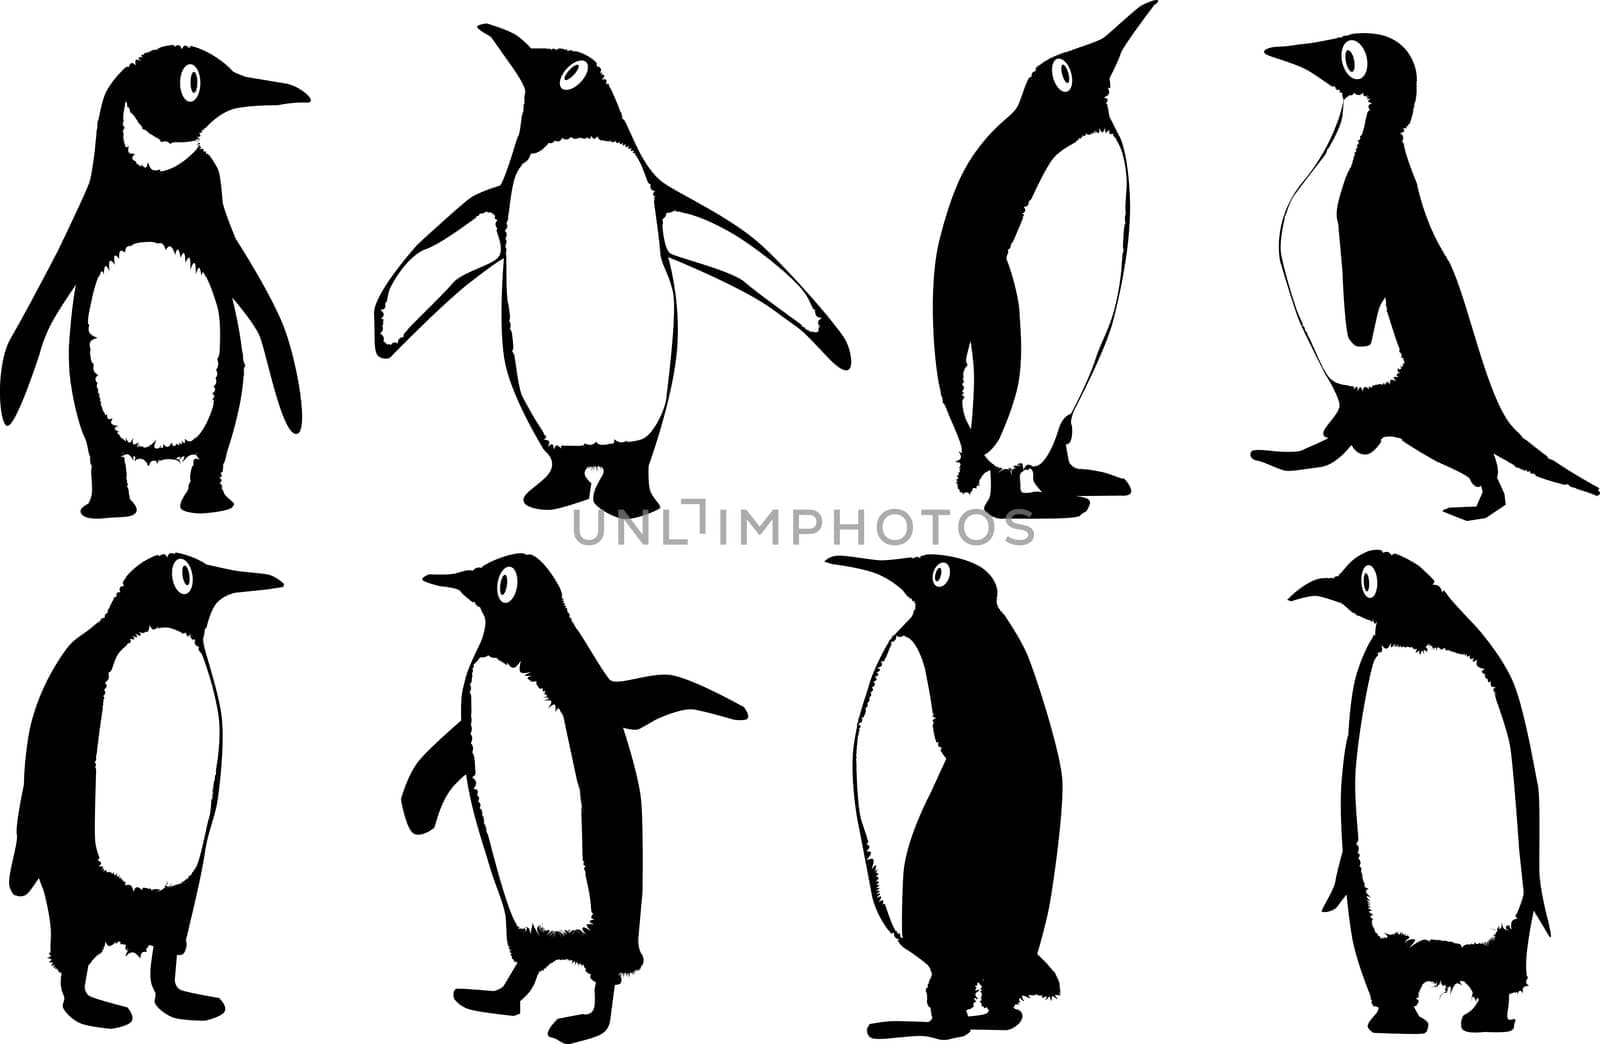 A collection of 8 vector penguins isolated on a white background.